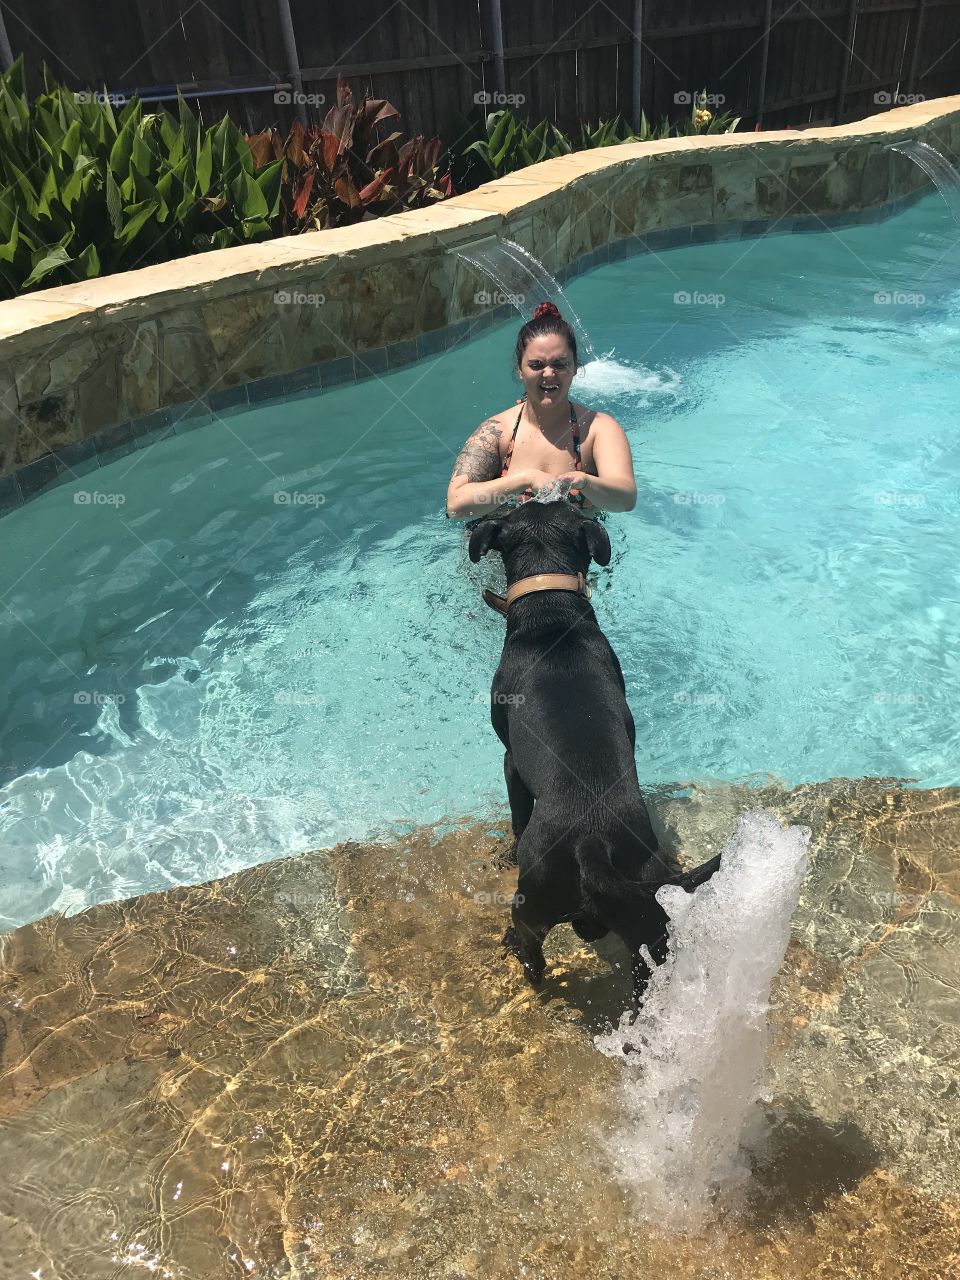 Splashing around in the pool with puppy on a beautiful but hot summer day in Texas 